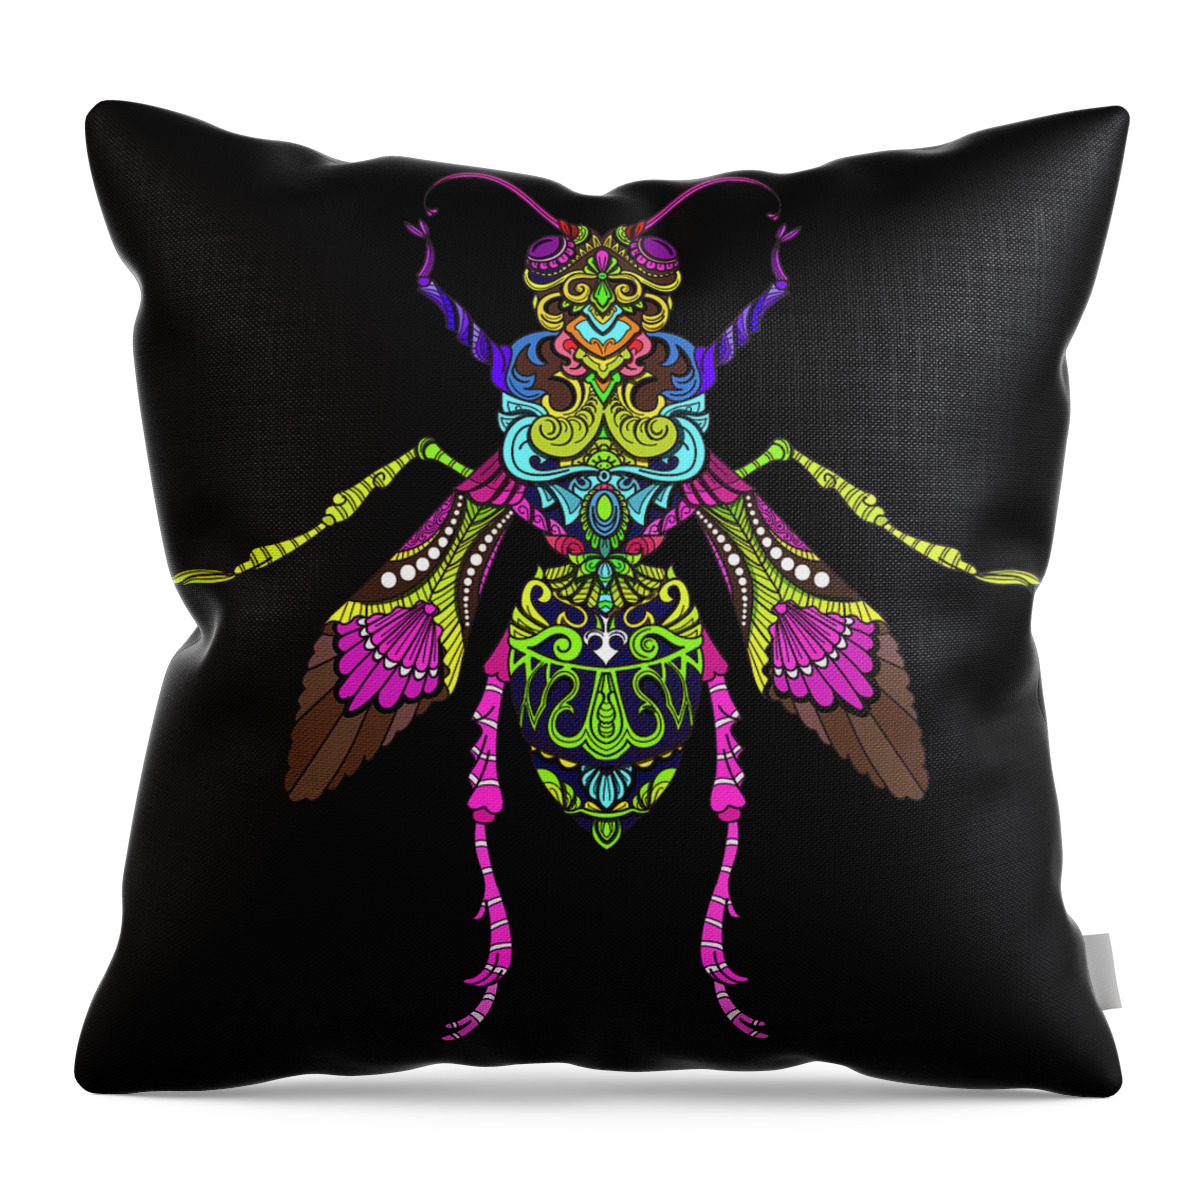 Adorable Throw Pillow featuring the painting Rubino Bug Wasp Bee Insect by Tony Rubino